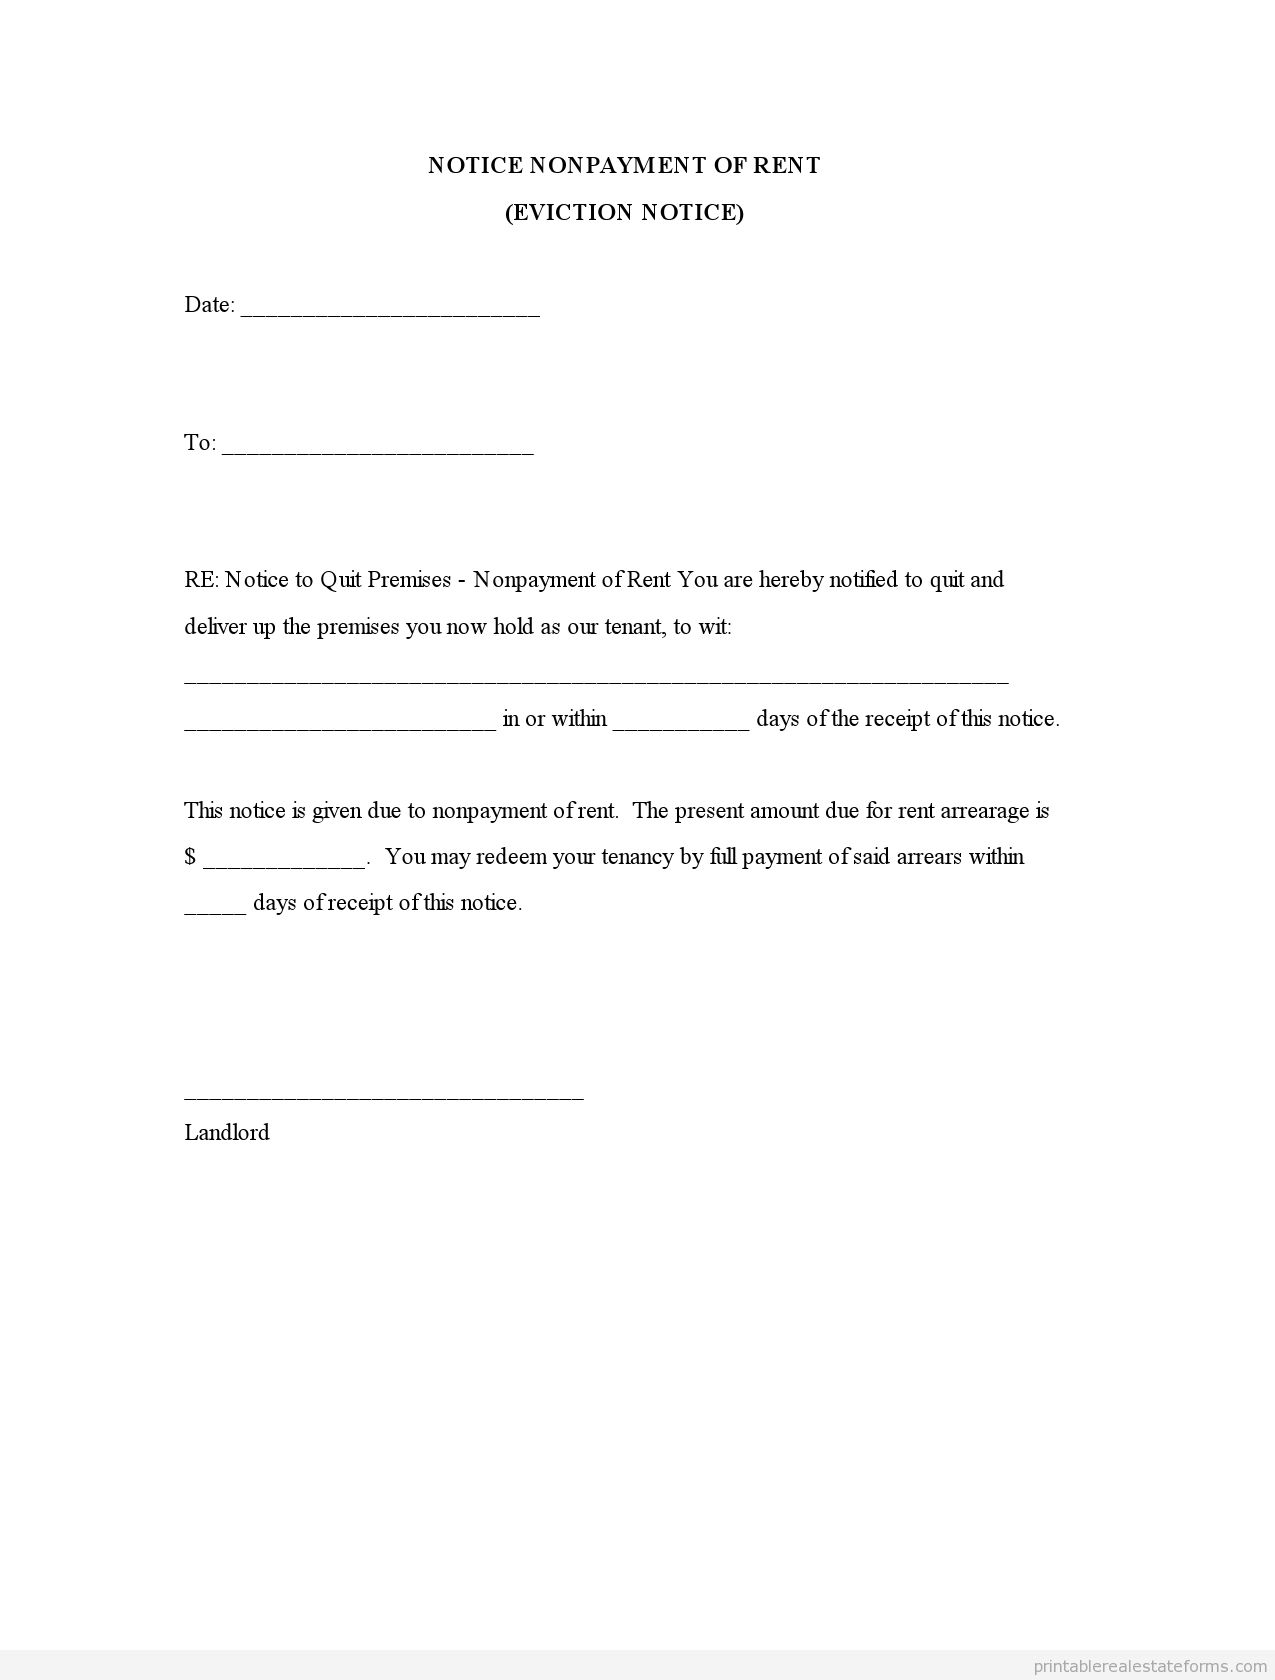 Intent to Lien Letter Template Texas - Example Intent to Lien Letter Sample Notice Picture Design